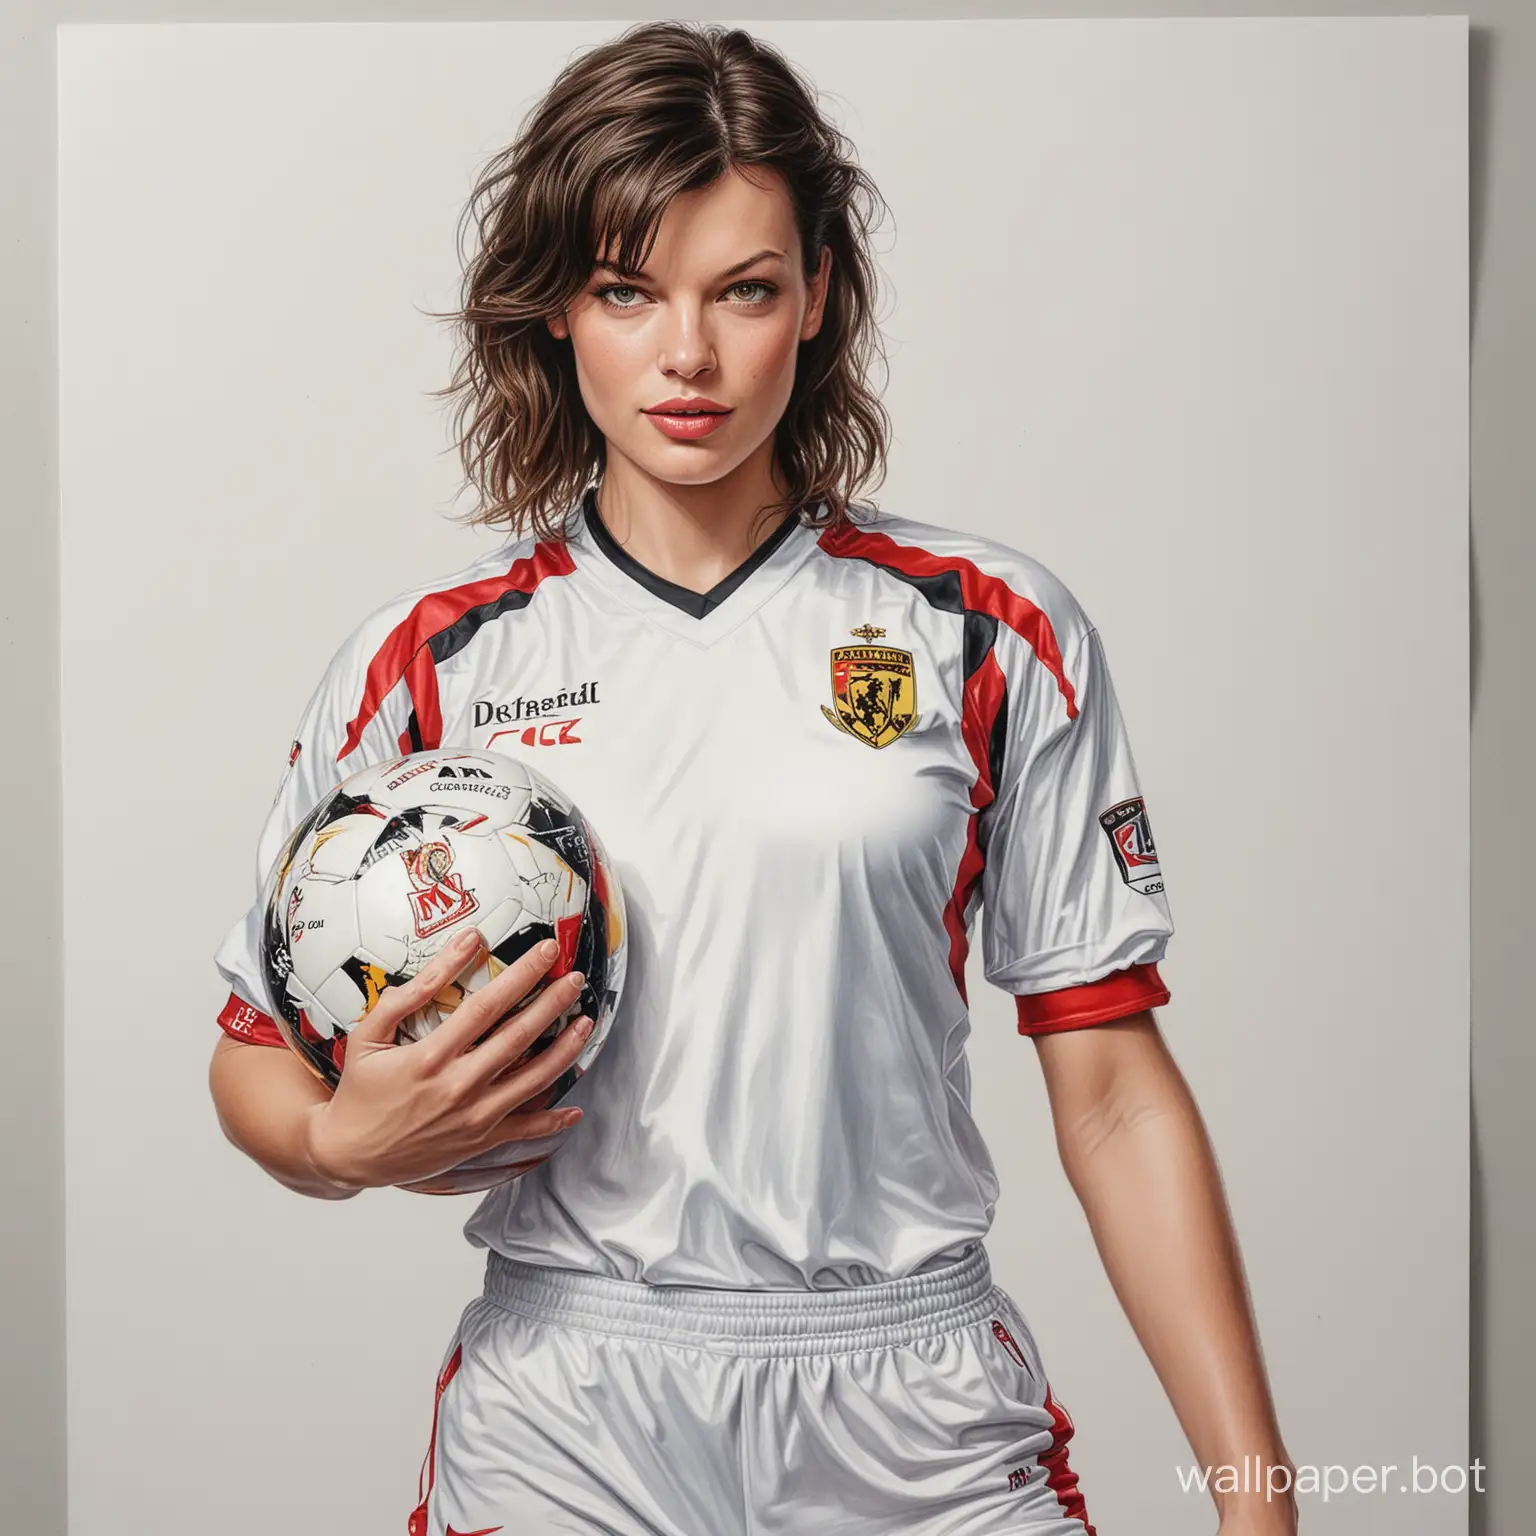 Young-Milla-Jovovich-in-MK-DONS-Football-Uniform-Holding-Champions-Cup-Realistic-Marker-Drawing